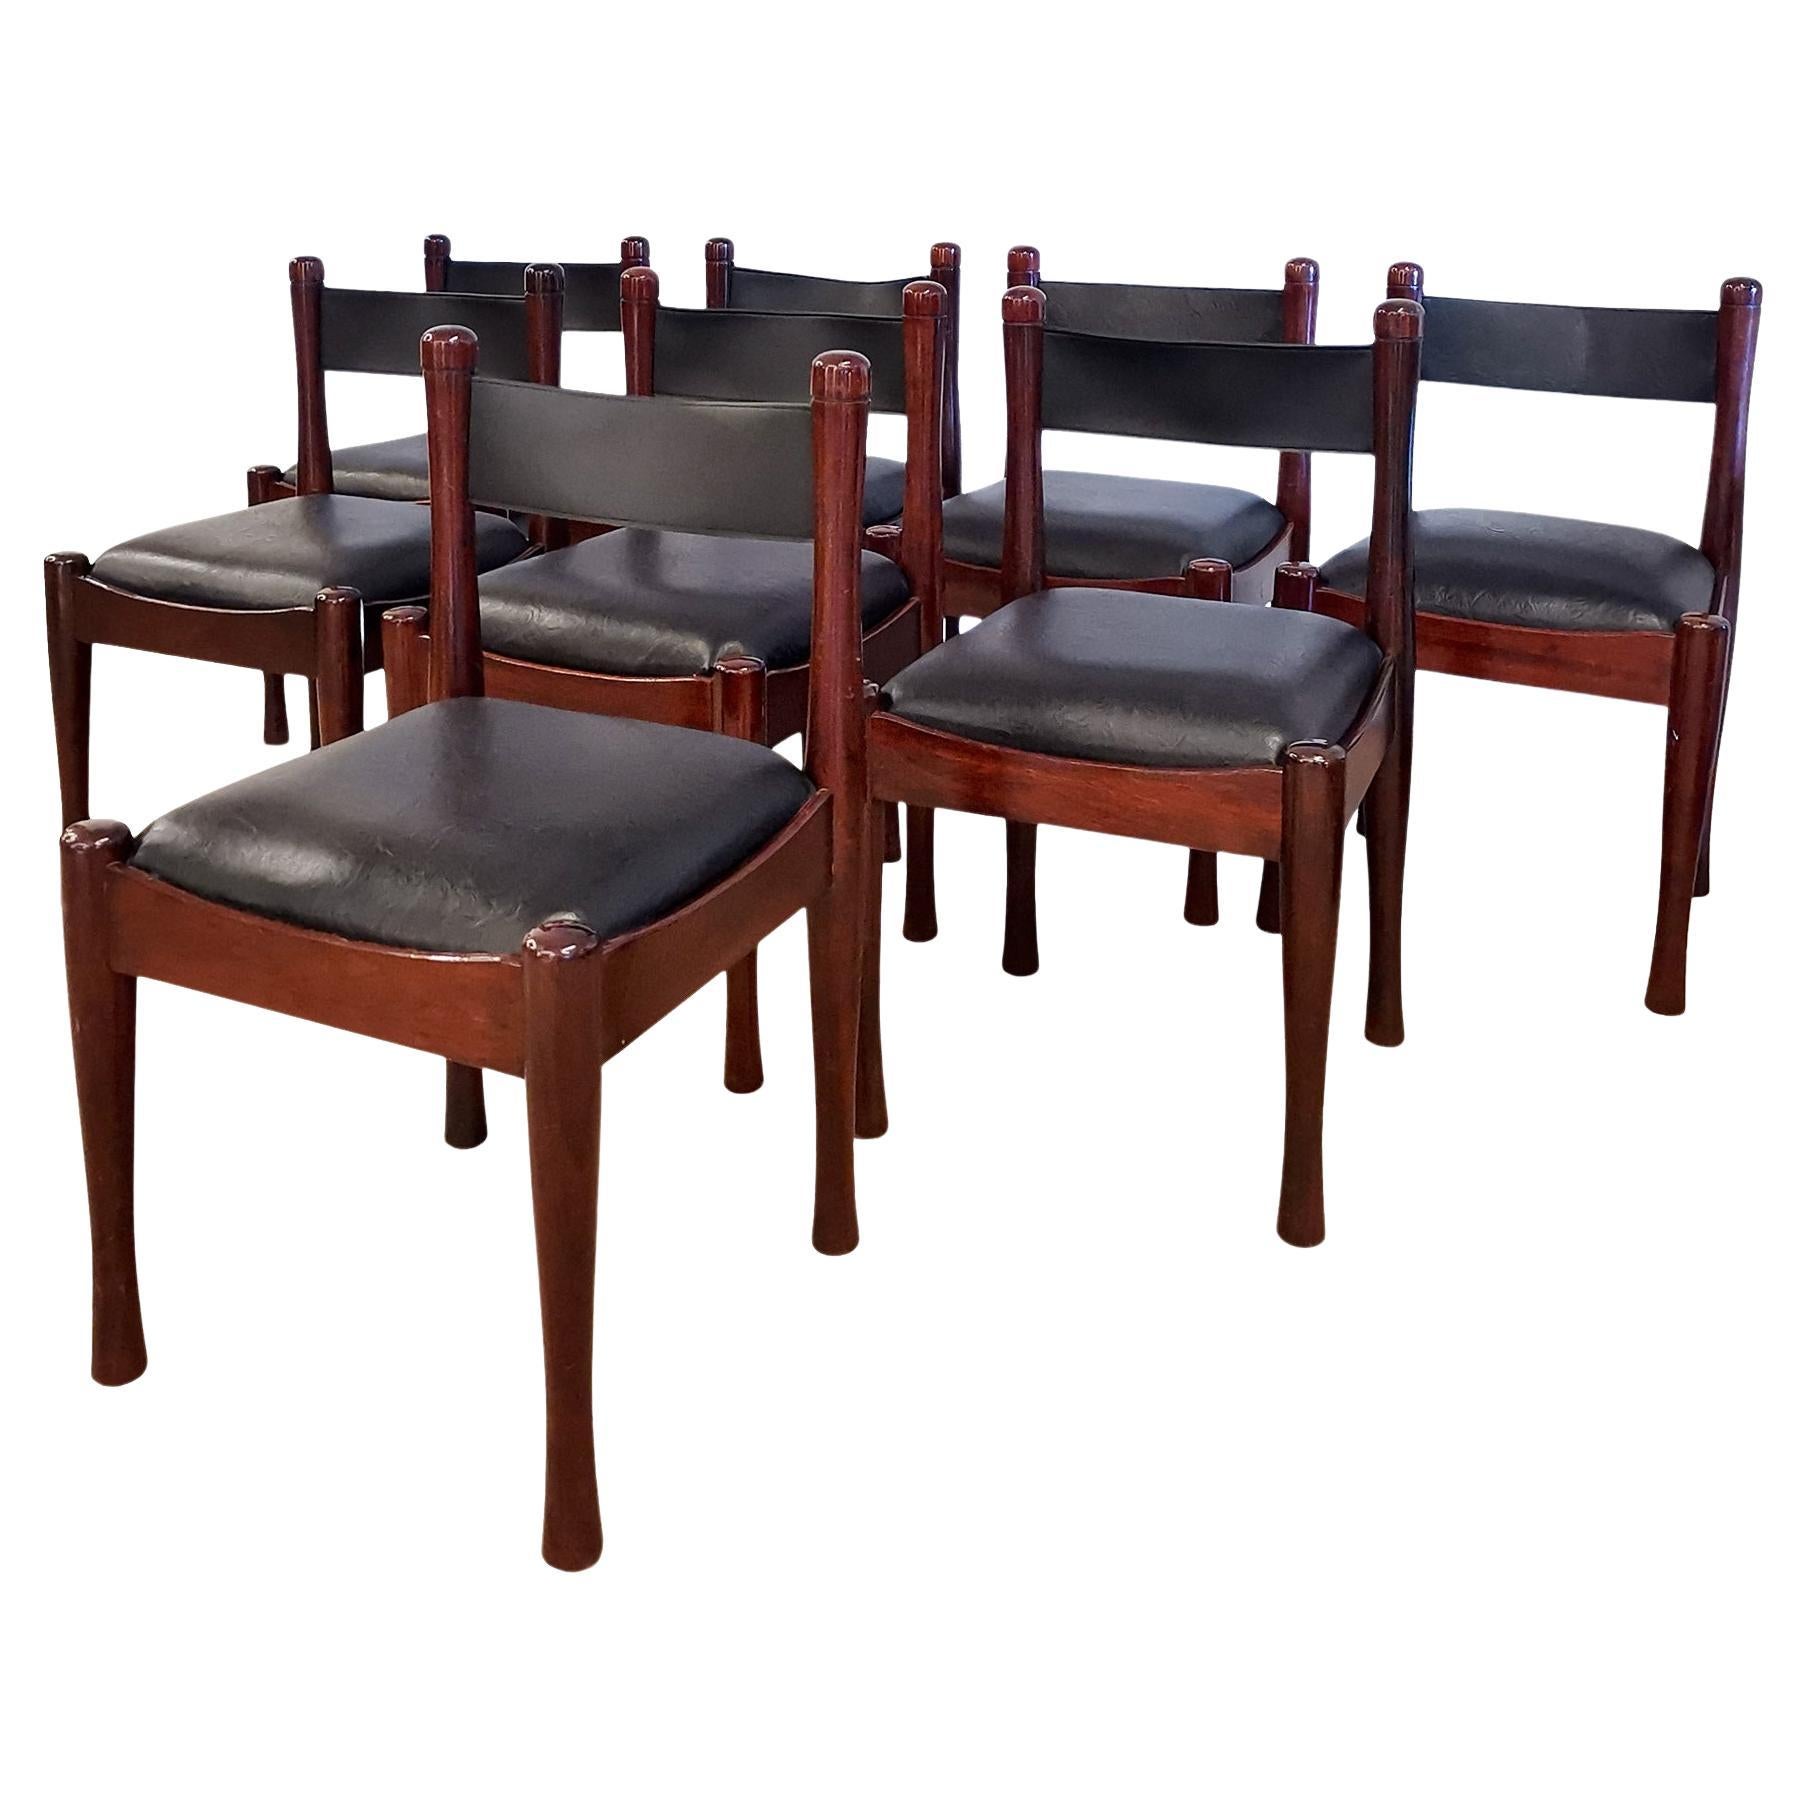 Set of Mid-Century Modern Chairs in Mahogany by Silvio Coppola - Italy, 1970 For Sale